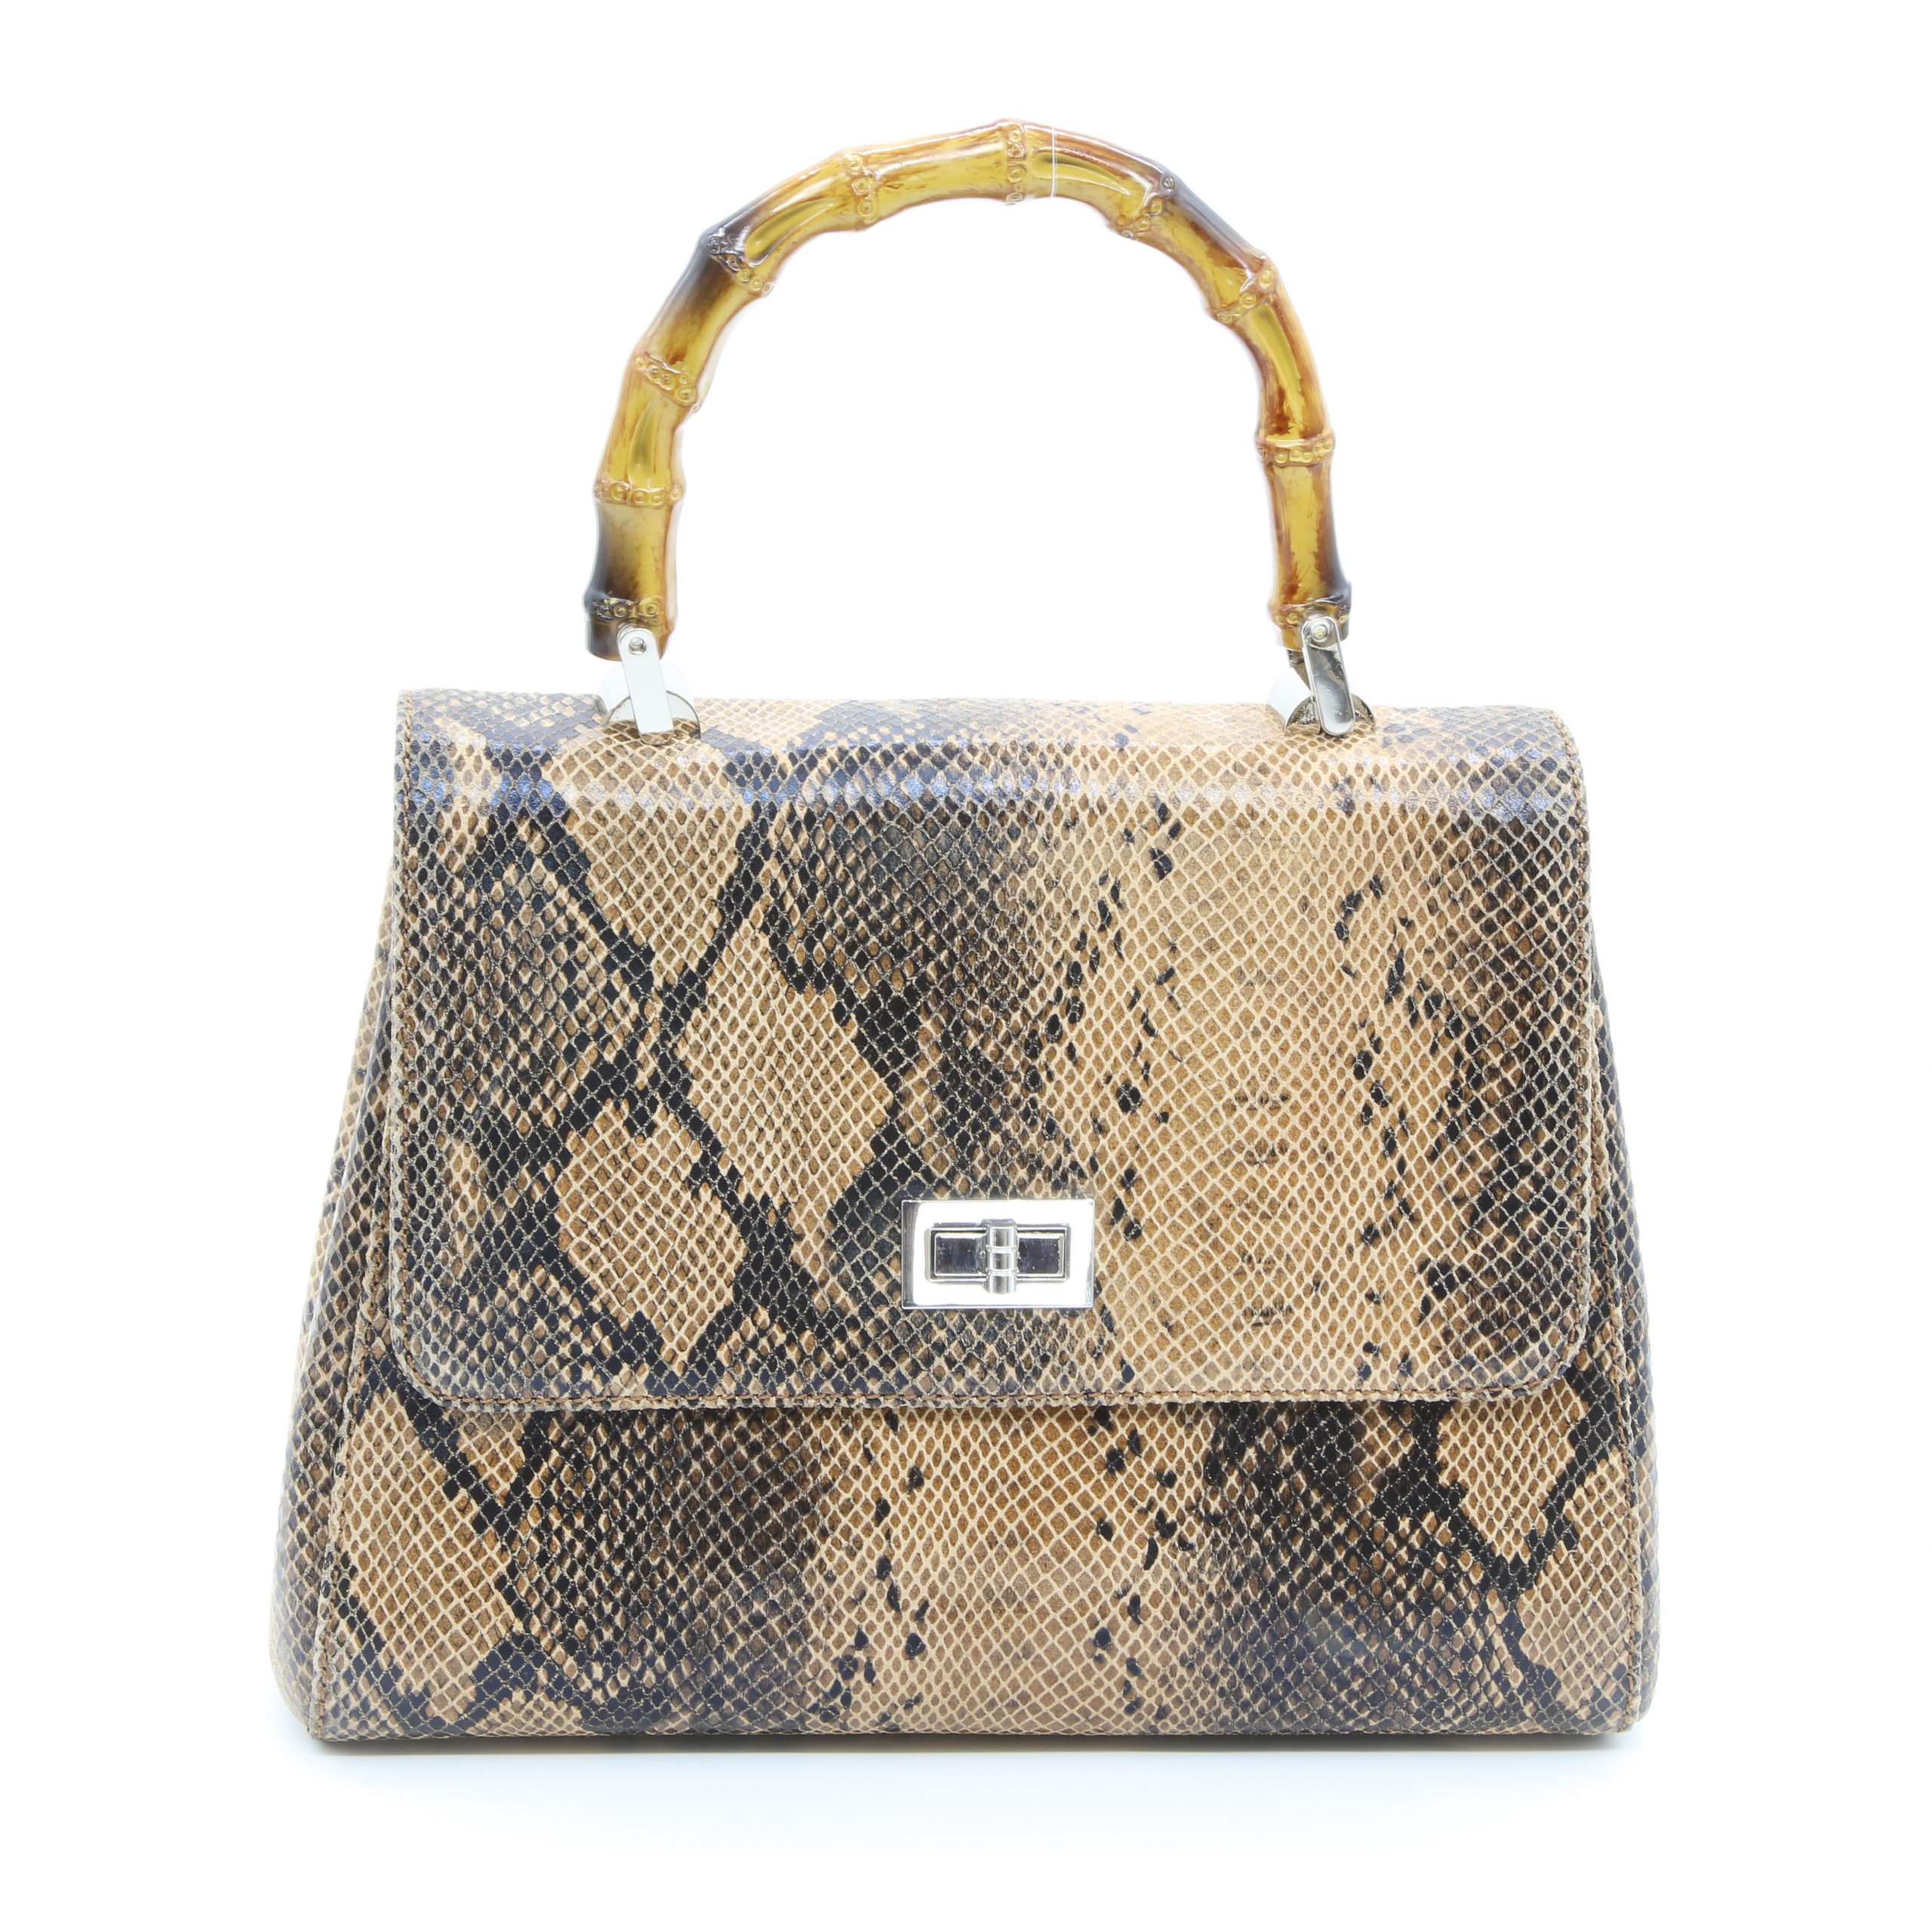 Lappella luxury soft Valentino leather grab bag in brown snake.